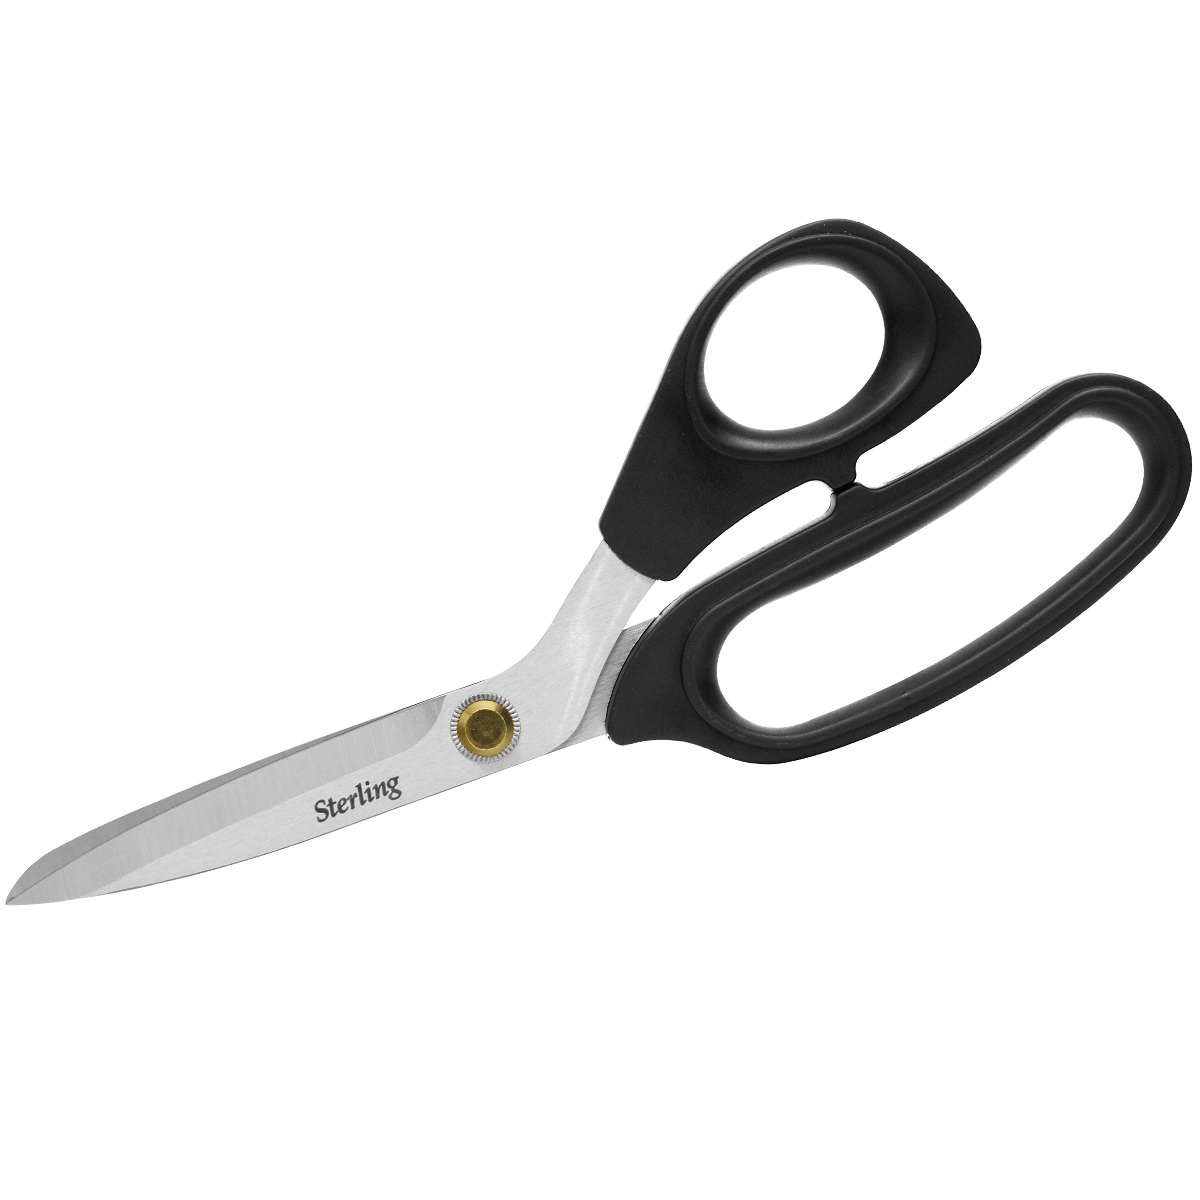 Black Panther Scissors 210mm, Small Handle, Serrated Blade